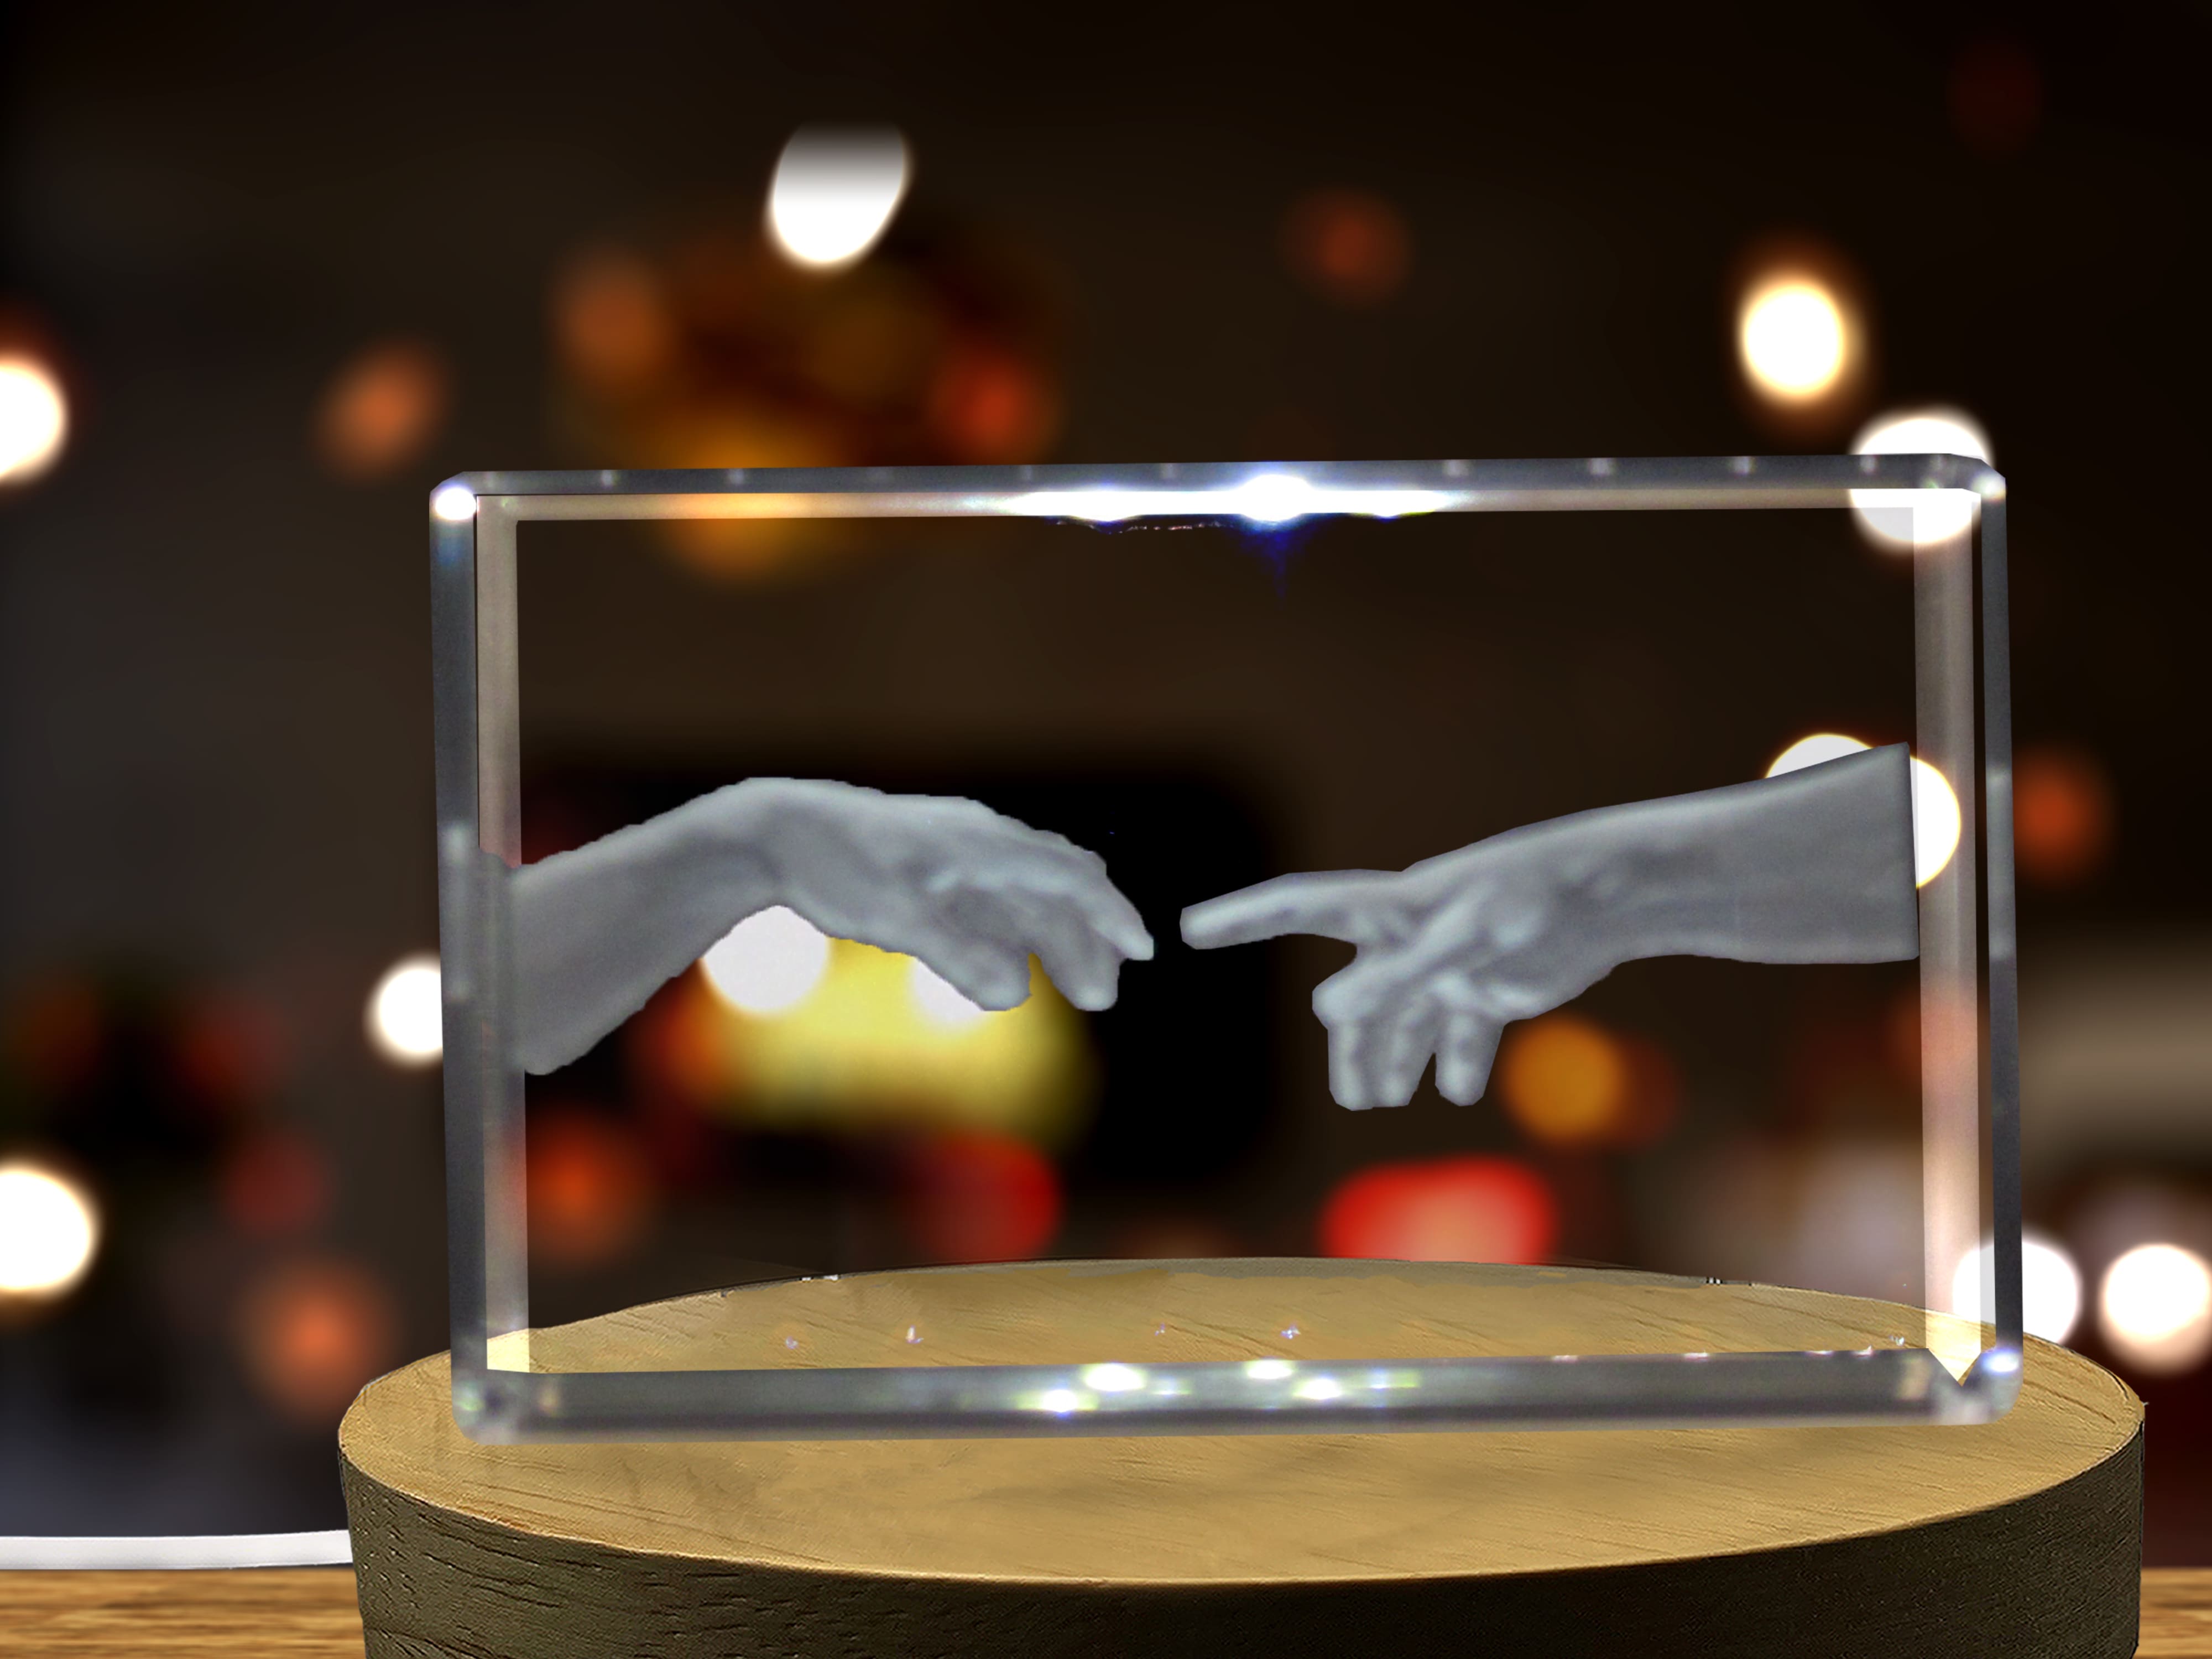 Hand of God and Adam Michelangelo 3D Engraved Crystal 3D Engraved Crystal Keepsake/Gift/Decor/Collectible/Souvenir A&B Crystal Collection